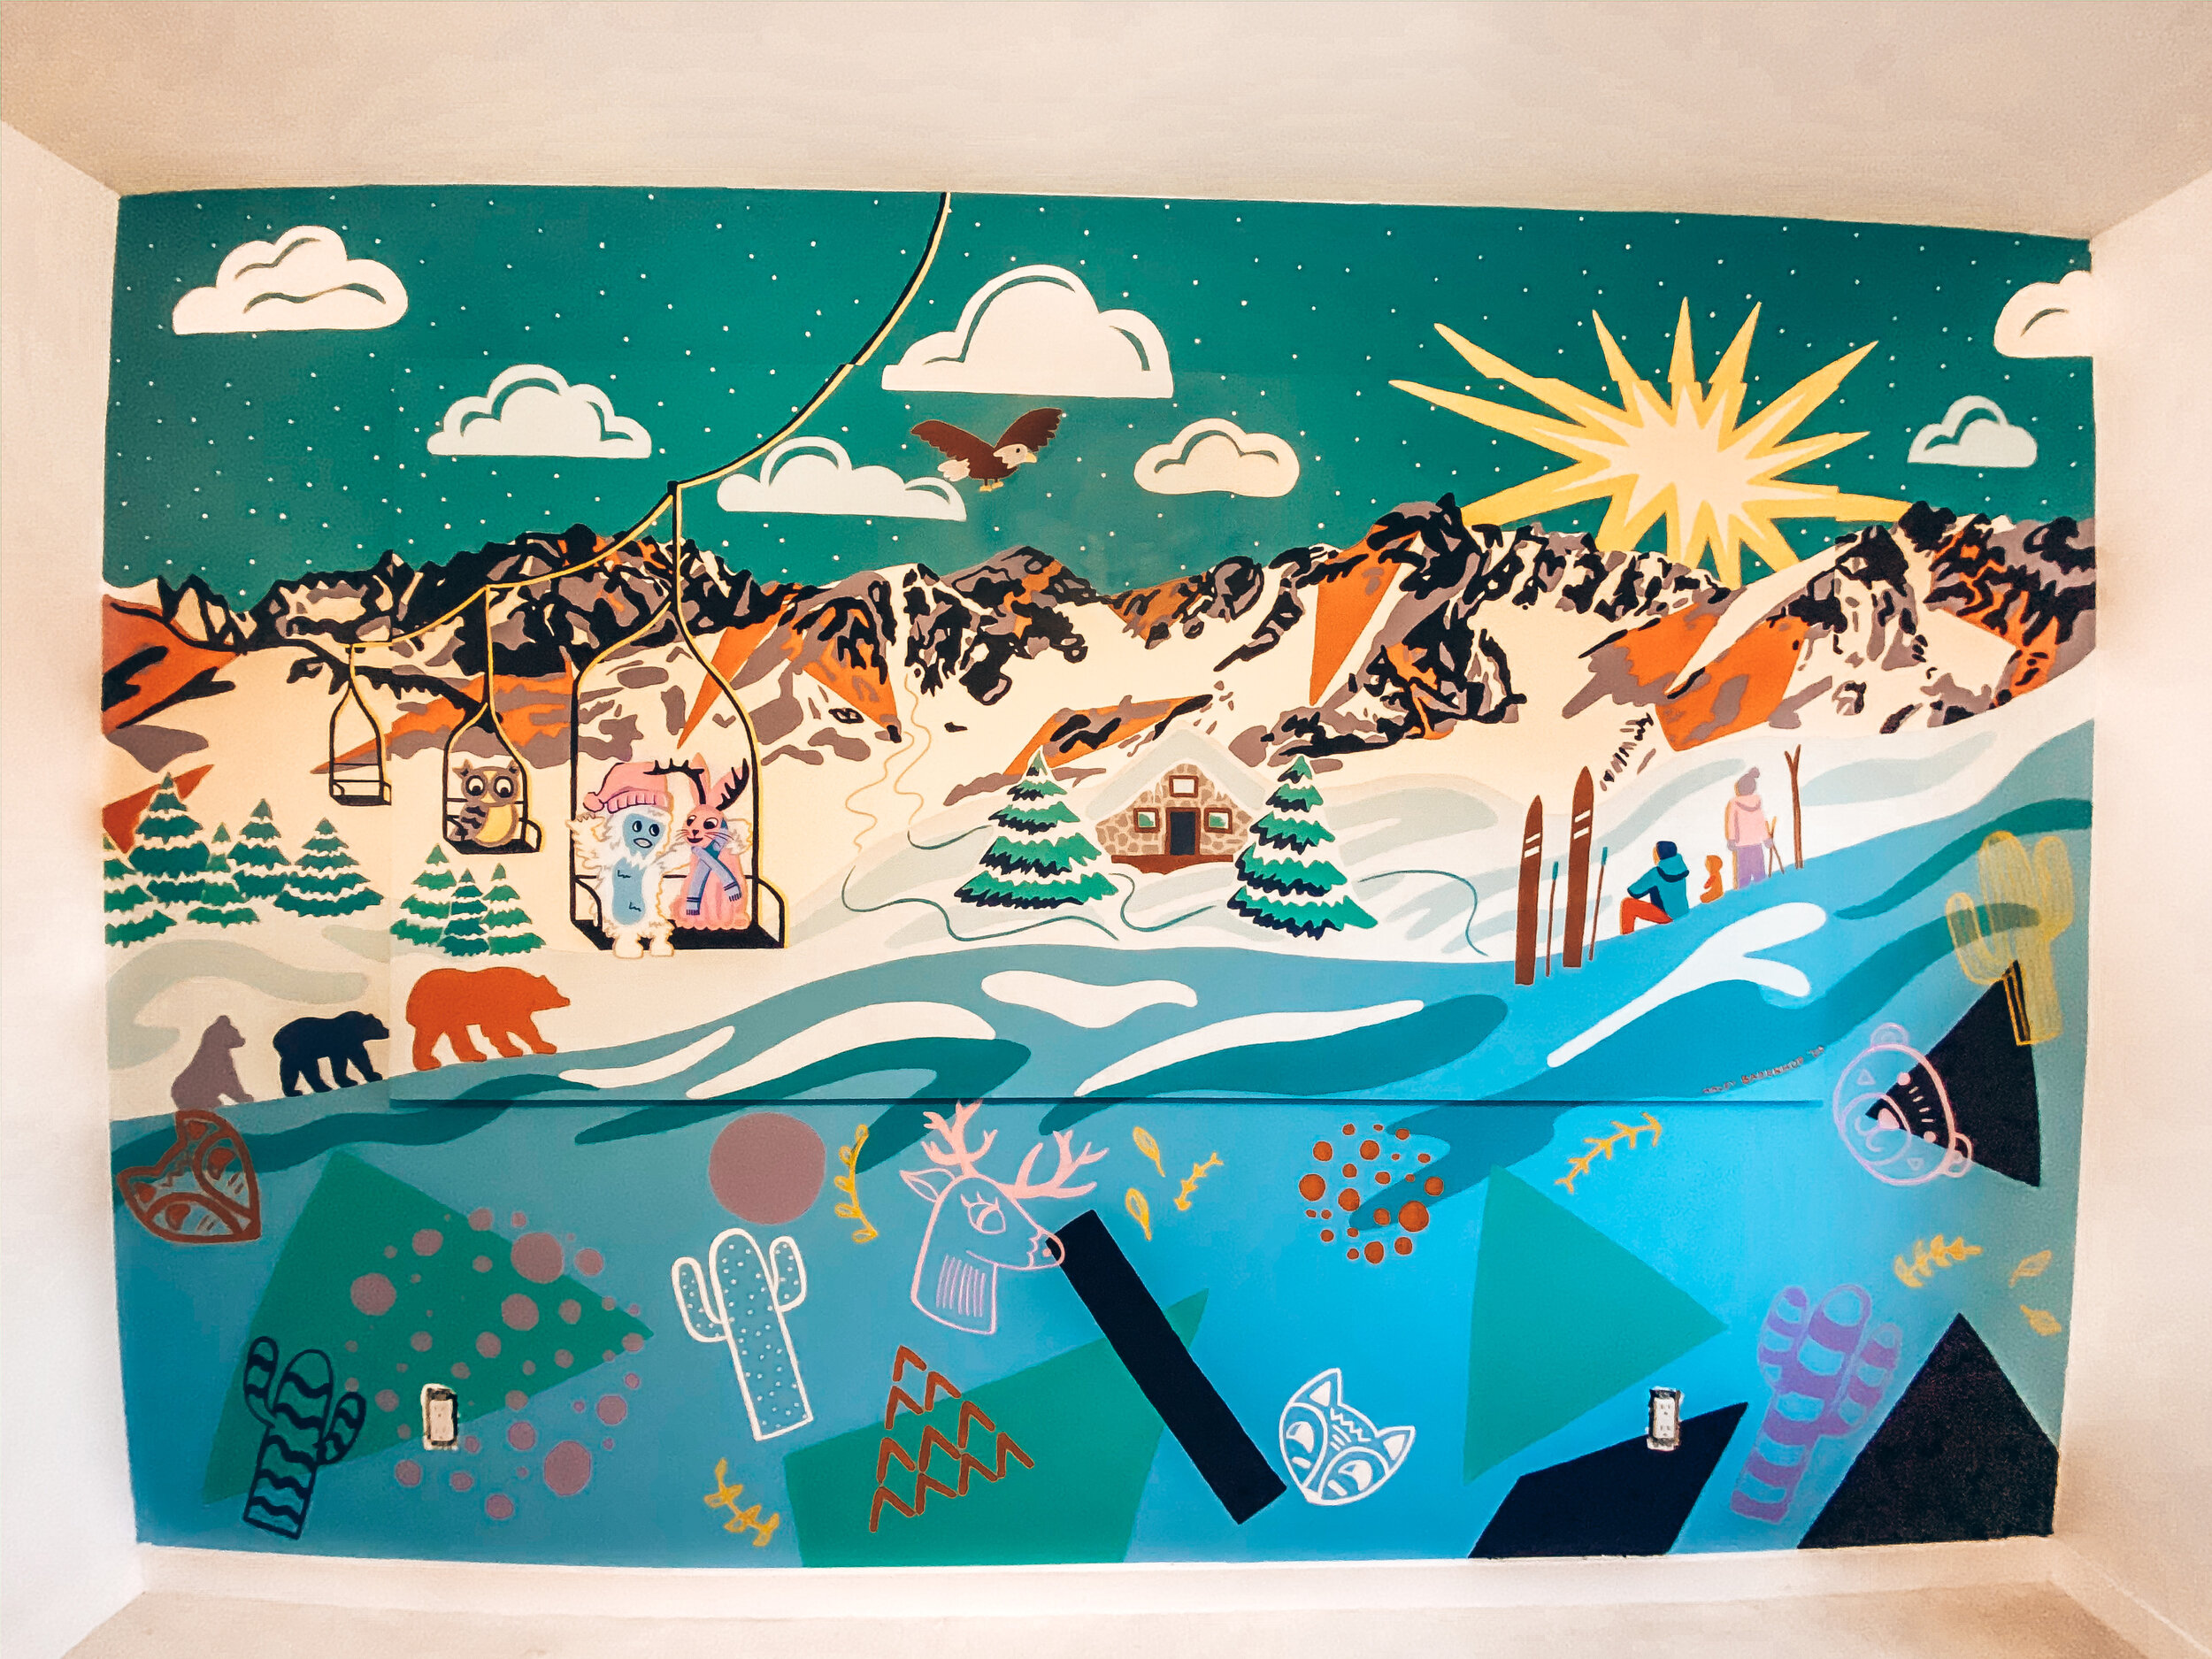 A-mural-depicting-snowy-mountains-and-a-ski-lift-in-bold-shapes-and-colors-is-painted-a masonite-board-attached-on-a-wall.